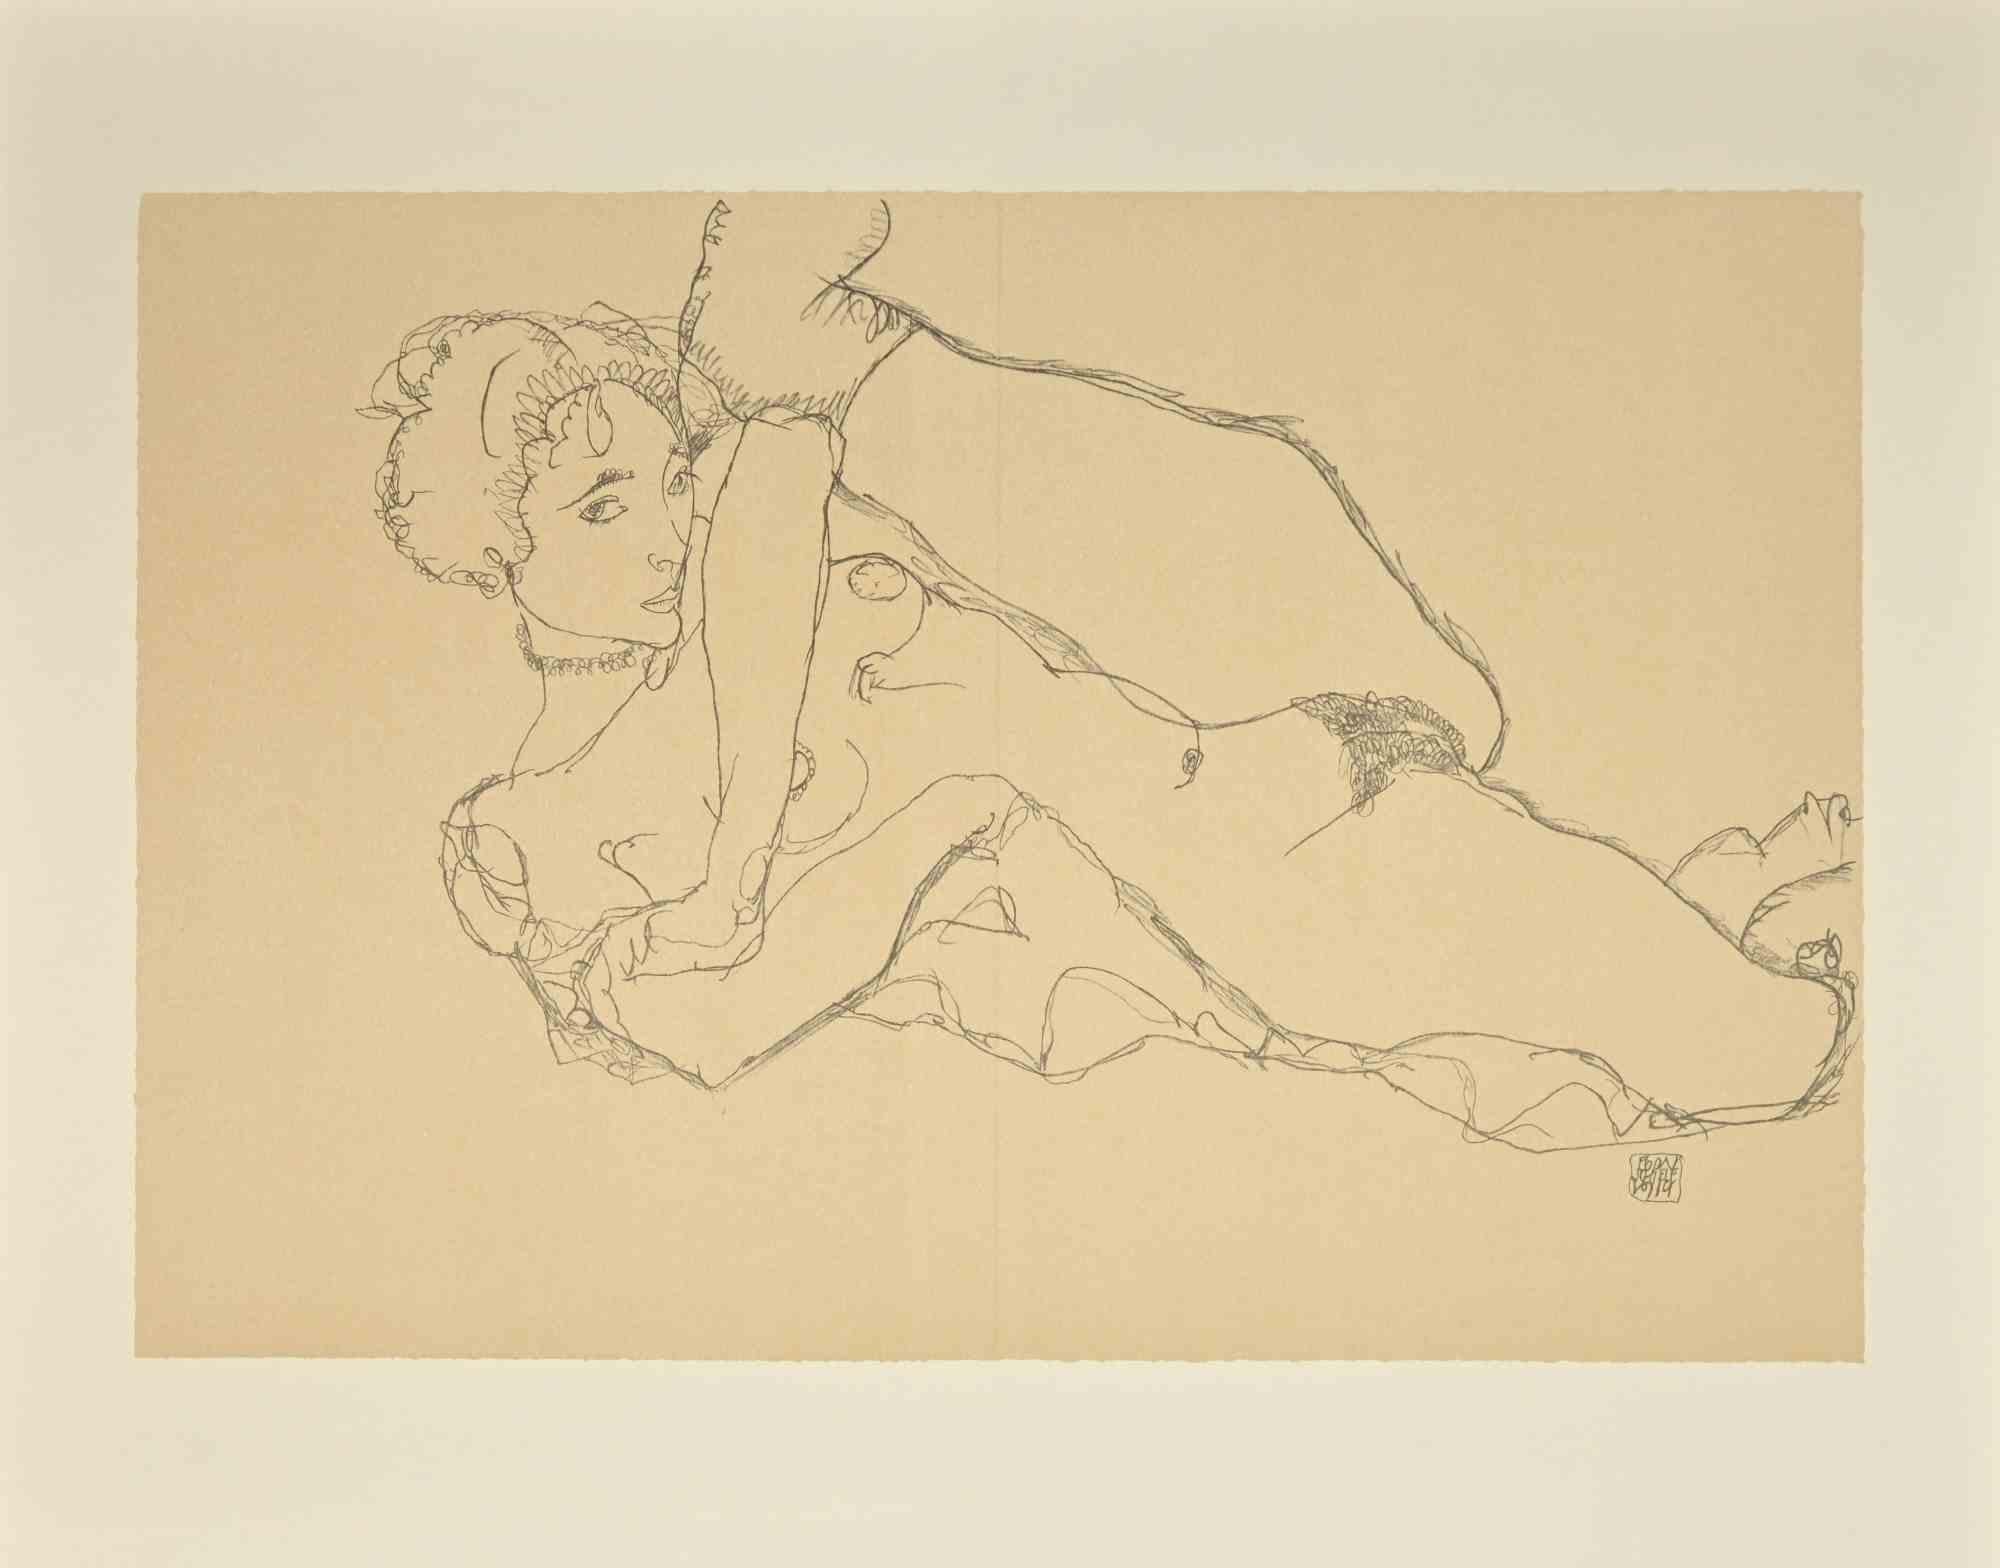 Reclining Nude, Left Leg Raised  is a beautiful lithograph from the portfolio " Erotica " after Egon Schiele.

It is a reproduction of the homonym pencil drawing realized by  the Austrian master in 1914.

This is a print from an  edition of 1200